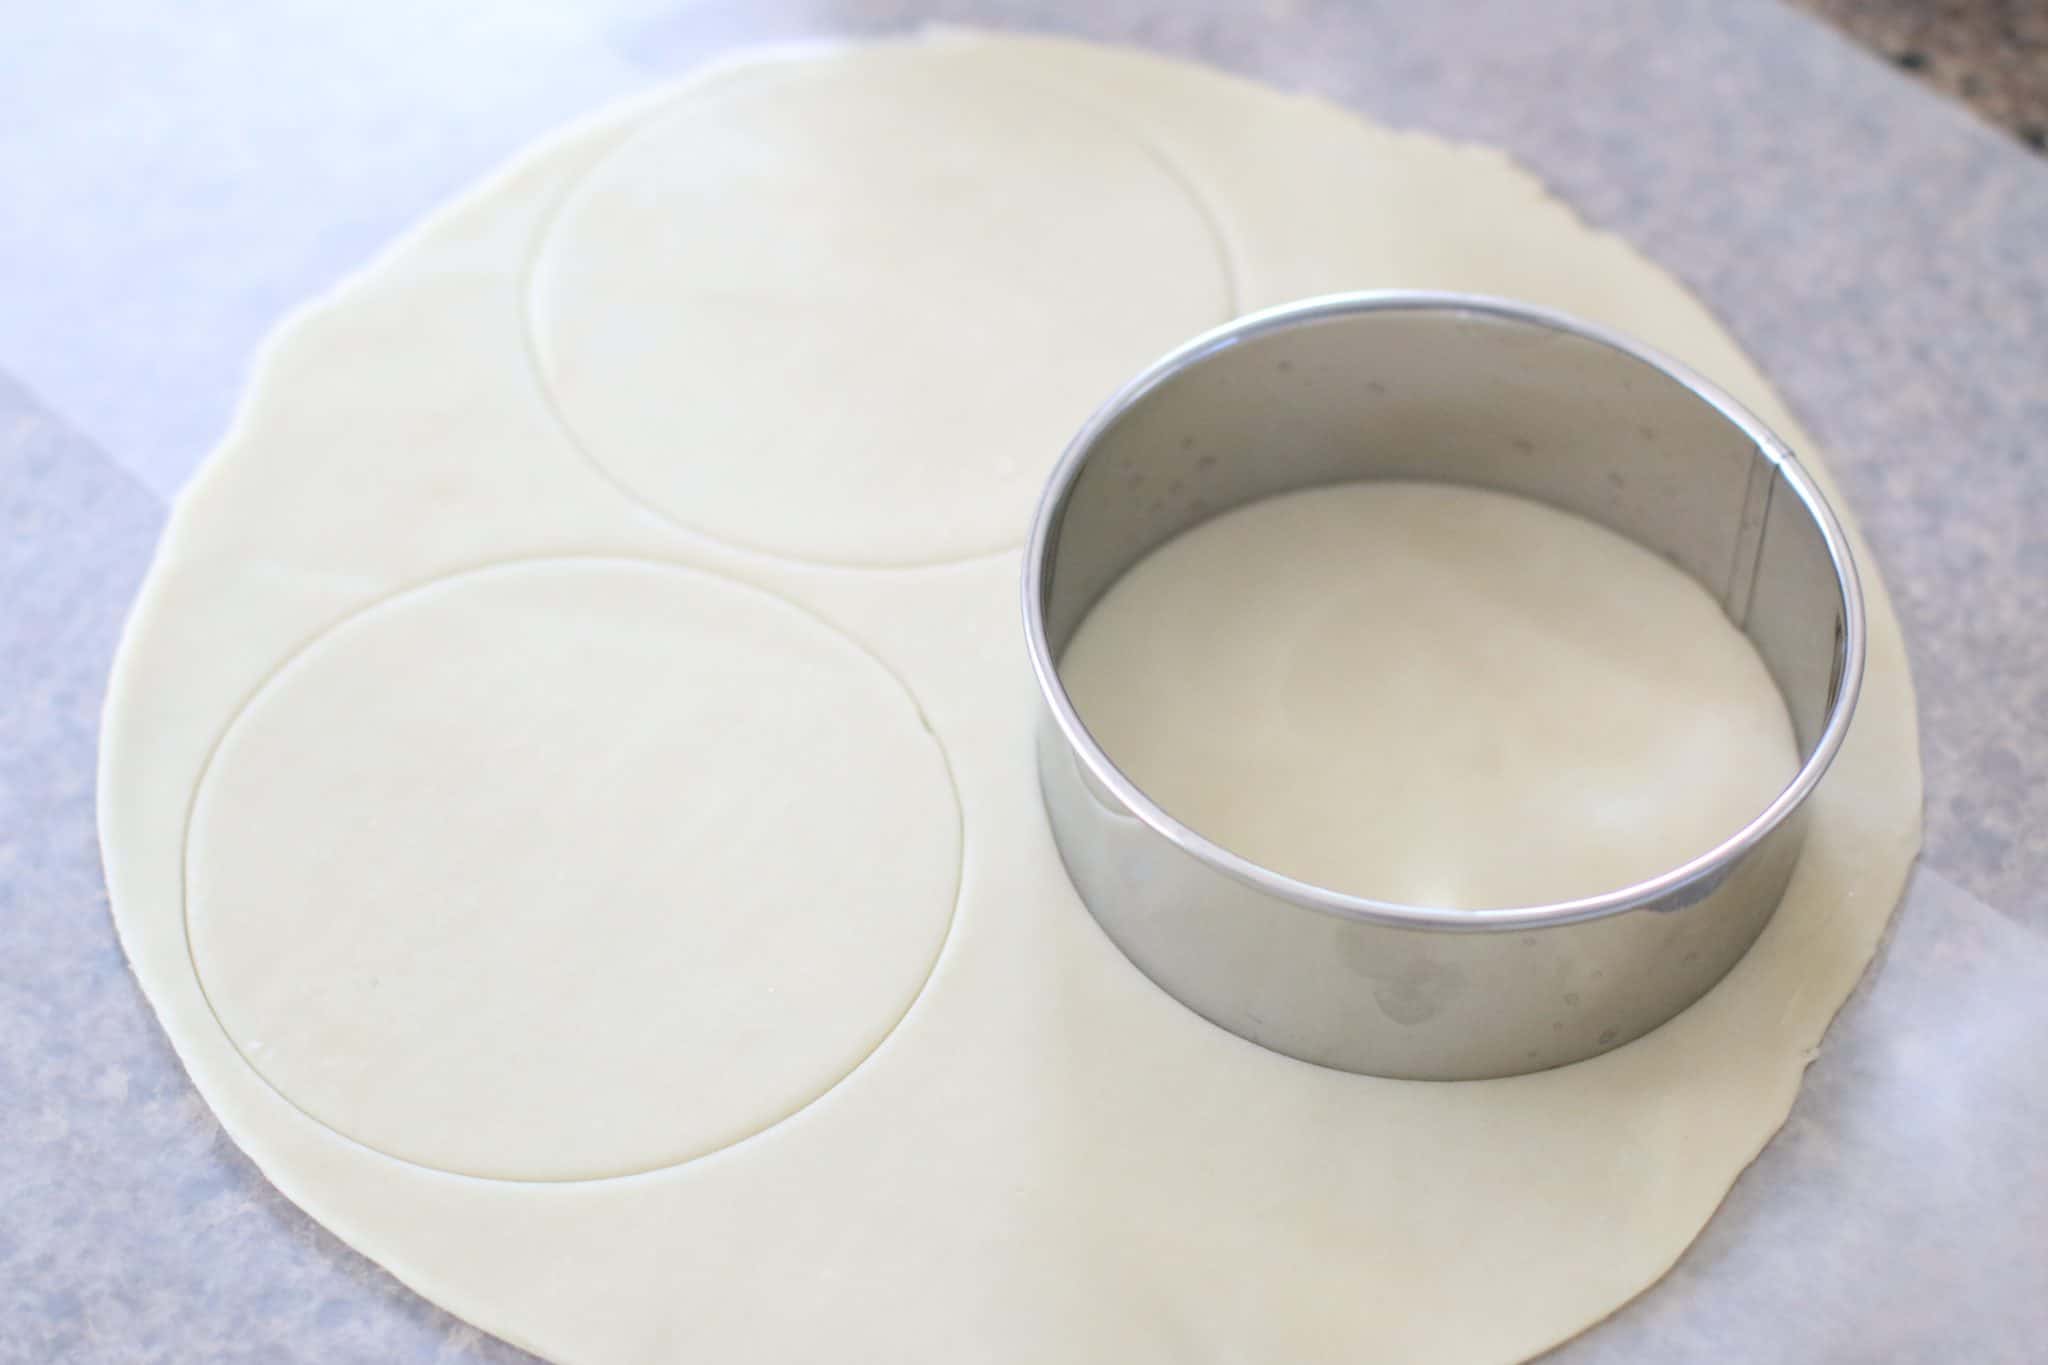 Pampered Chef Large Pie Cutter cutting out small pie crusts.